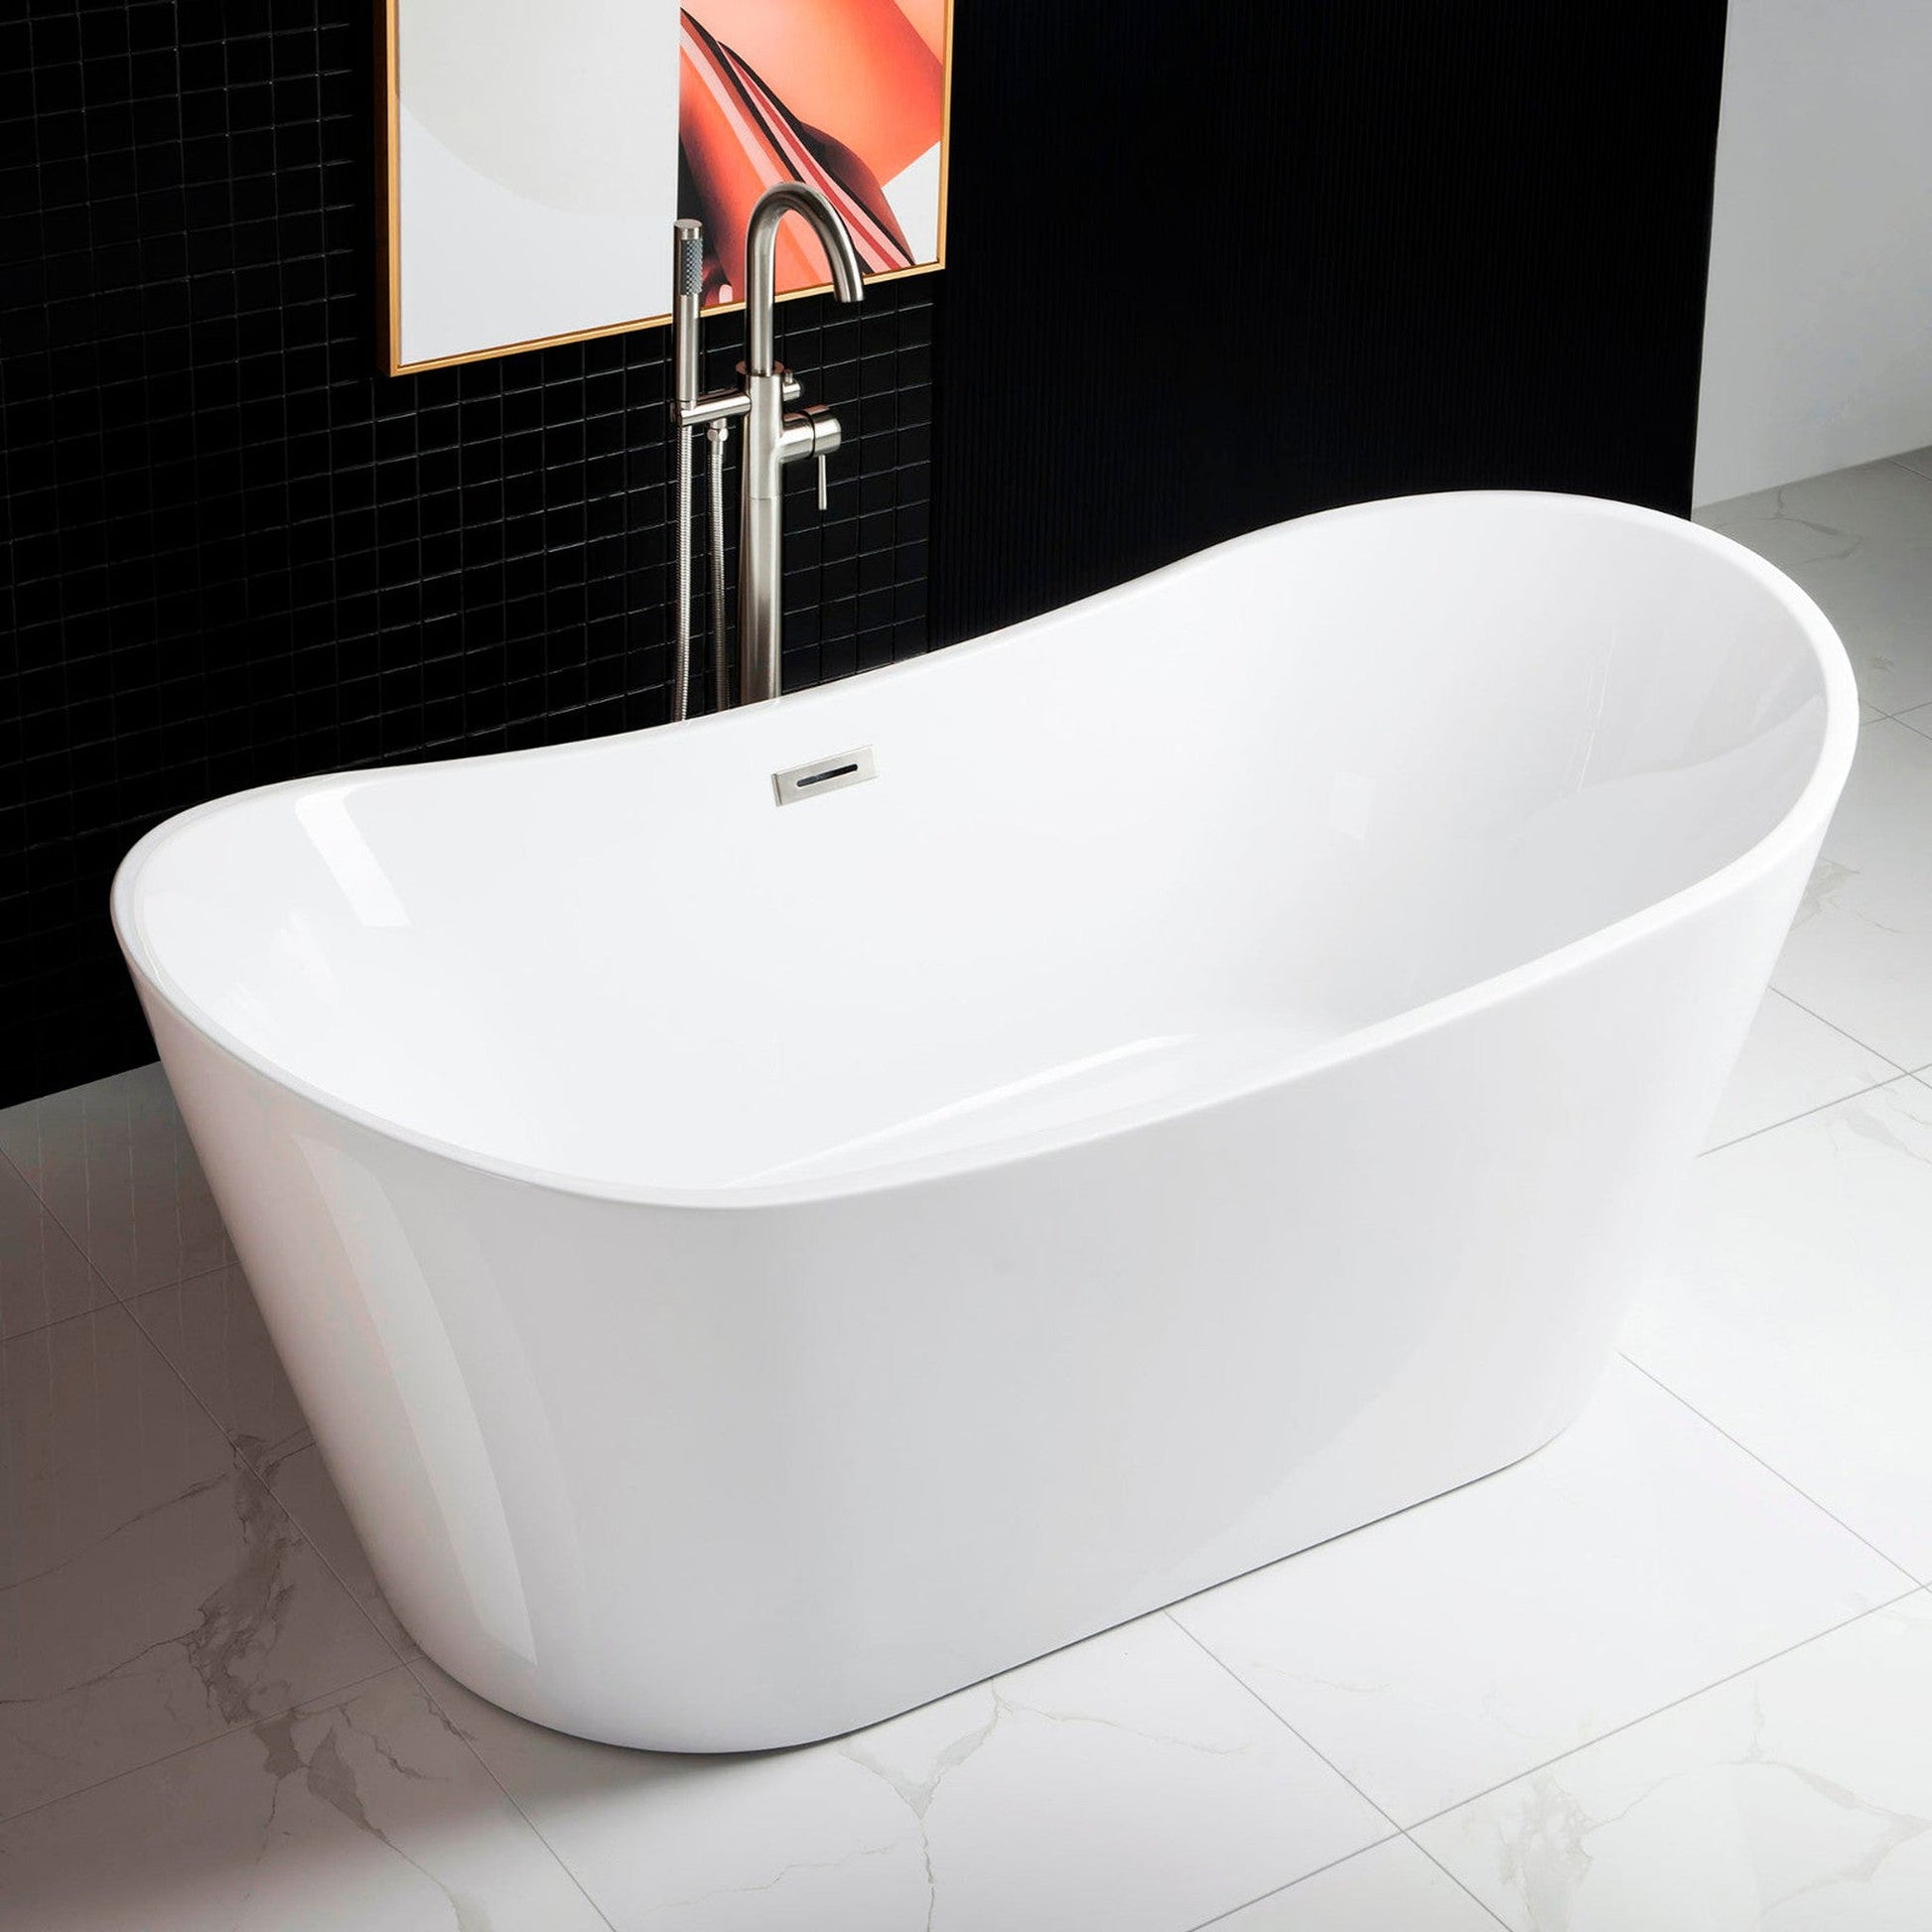 WoodBridge B0010 67" White Acrylic Freestanding Contemporary Soaking Bathtub With Chrome Drain, Overflow, F-0013 Tub Filler and Caddy Tray